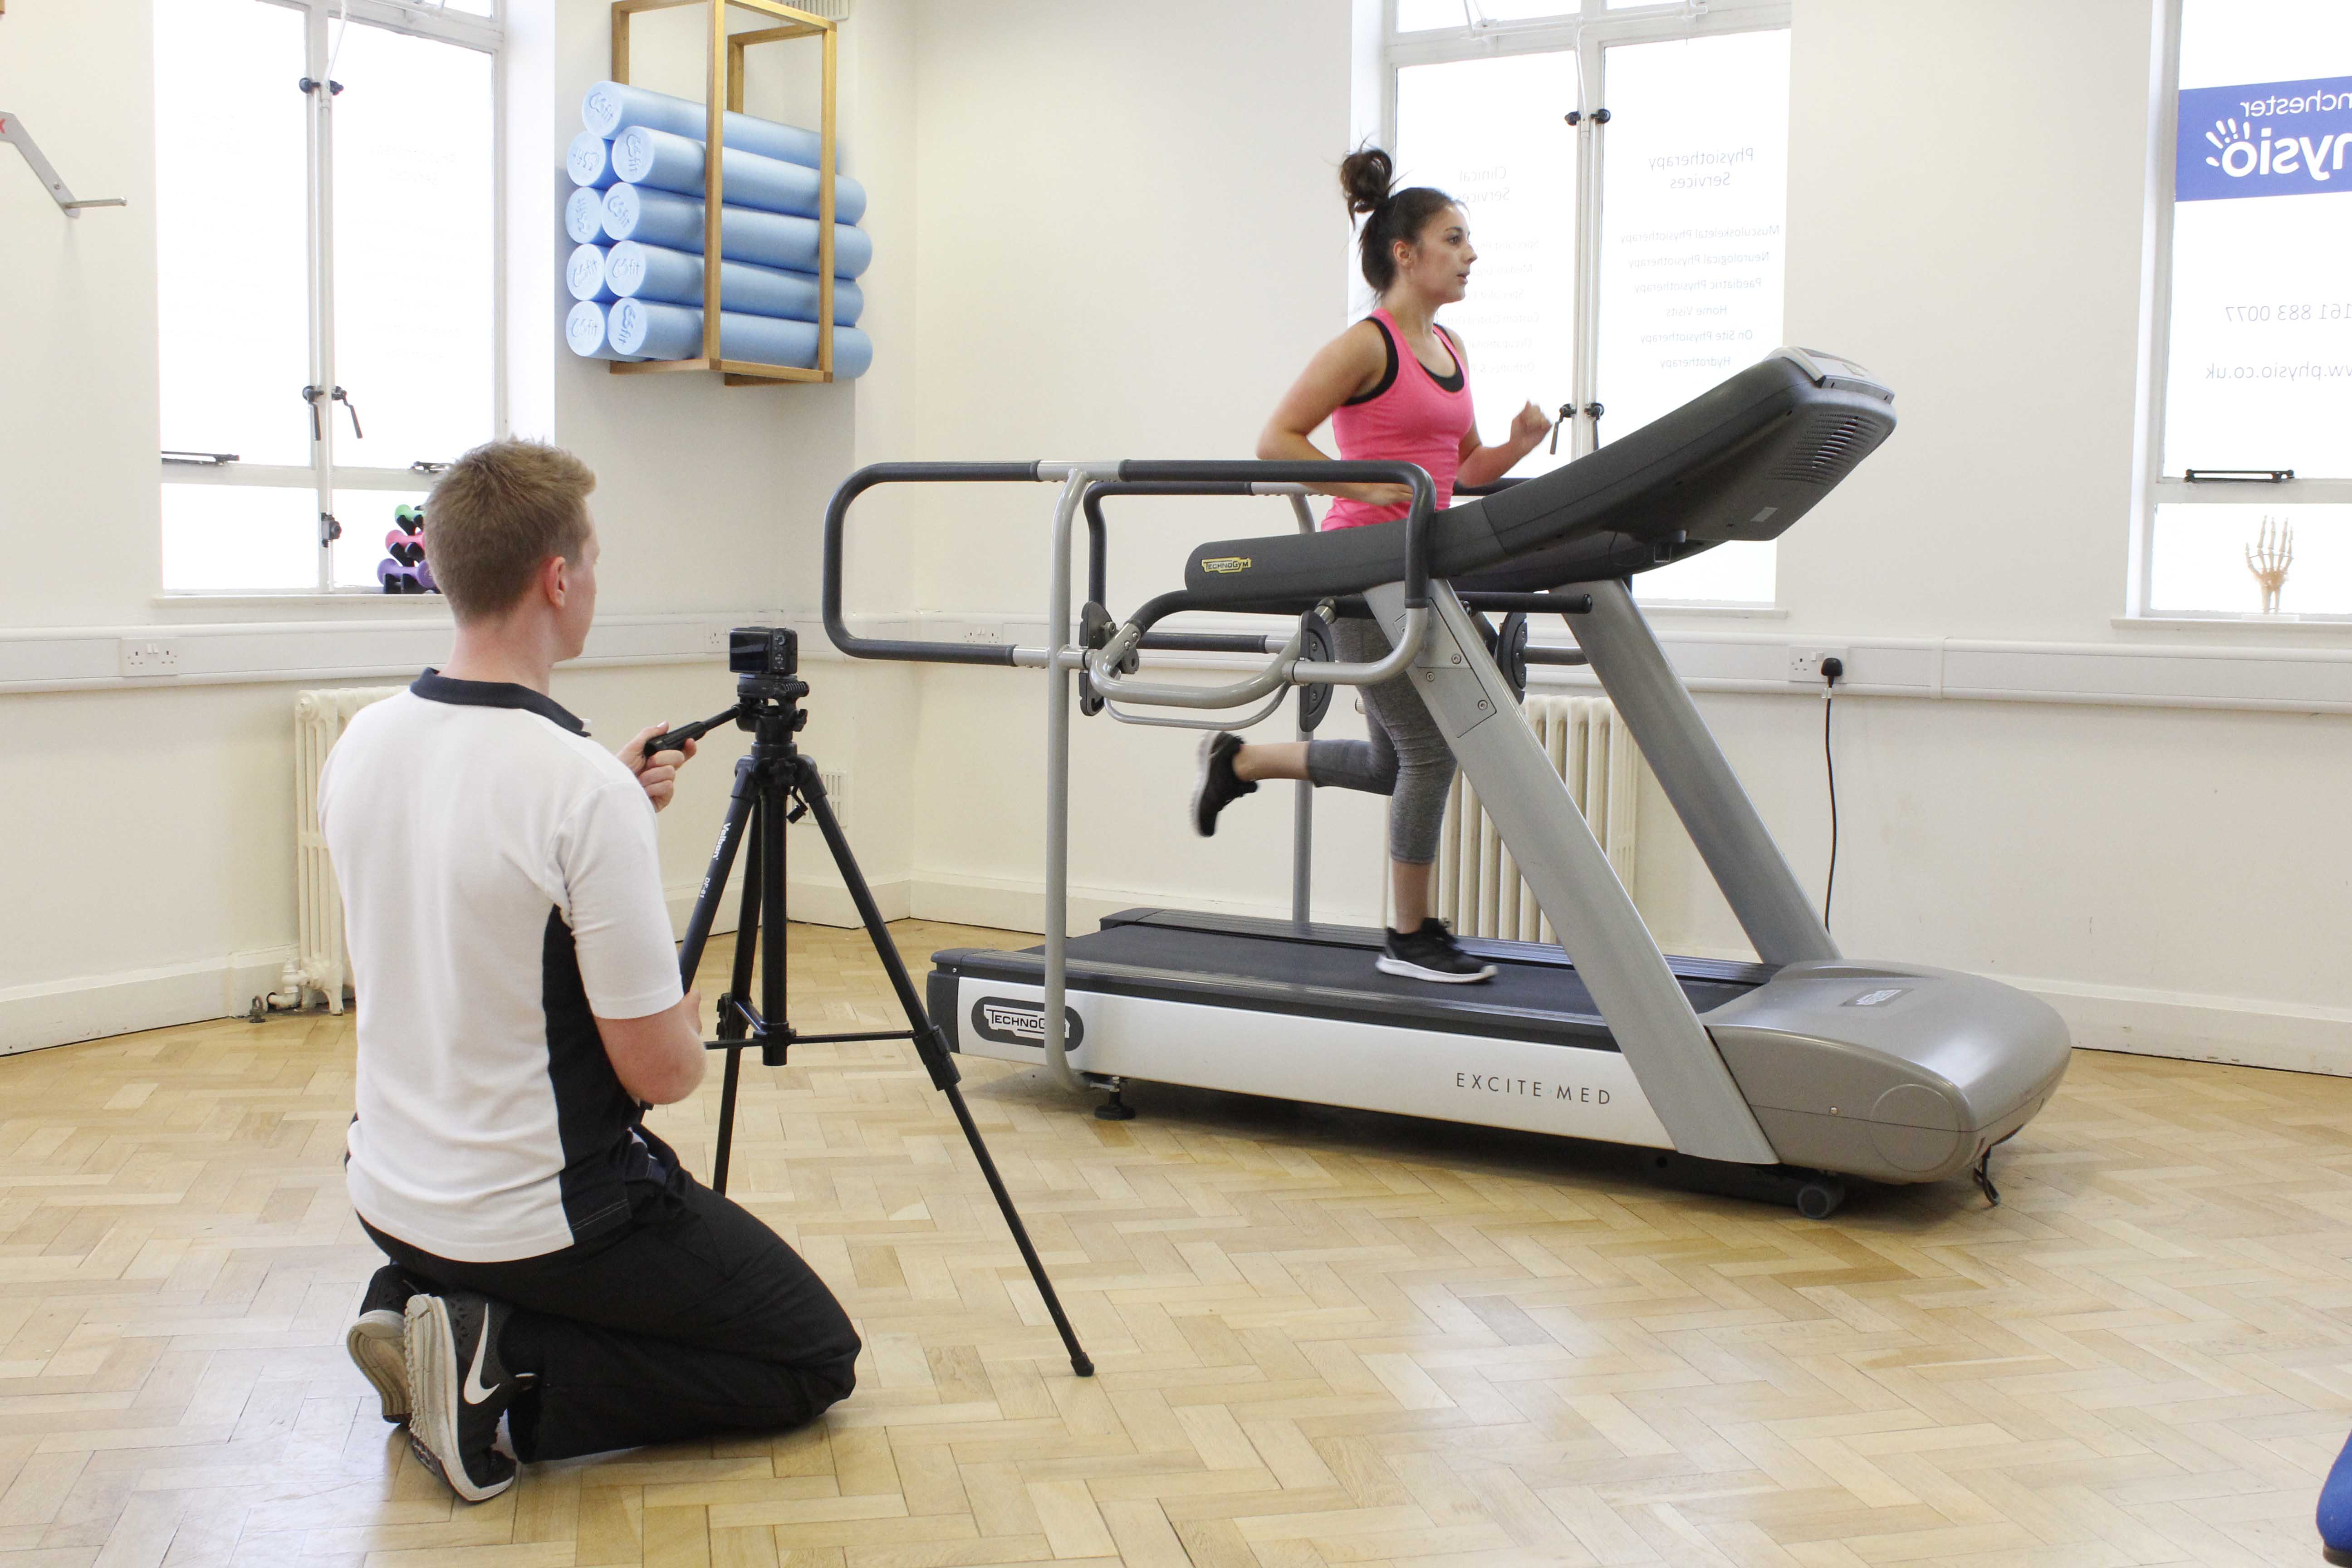 Biomechanical assessment of a runners gait by a specialist physiotherapist